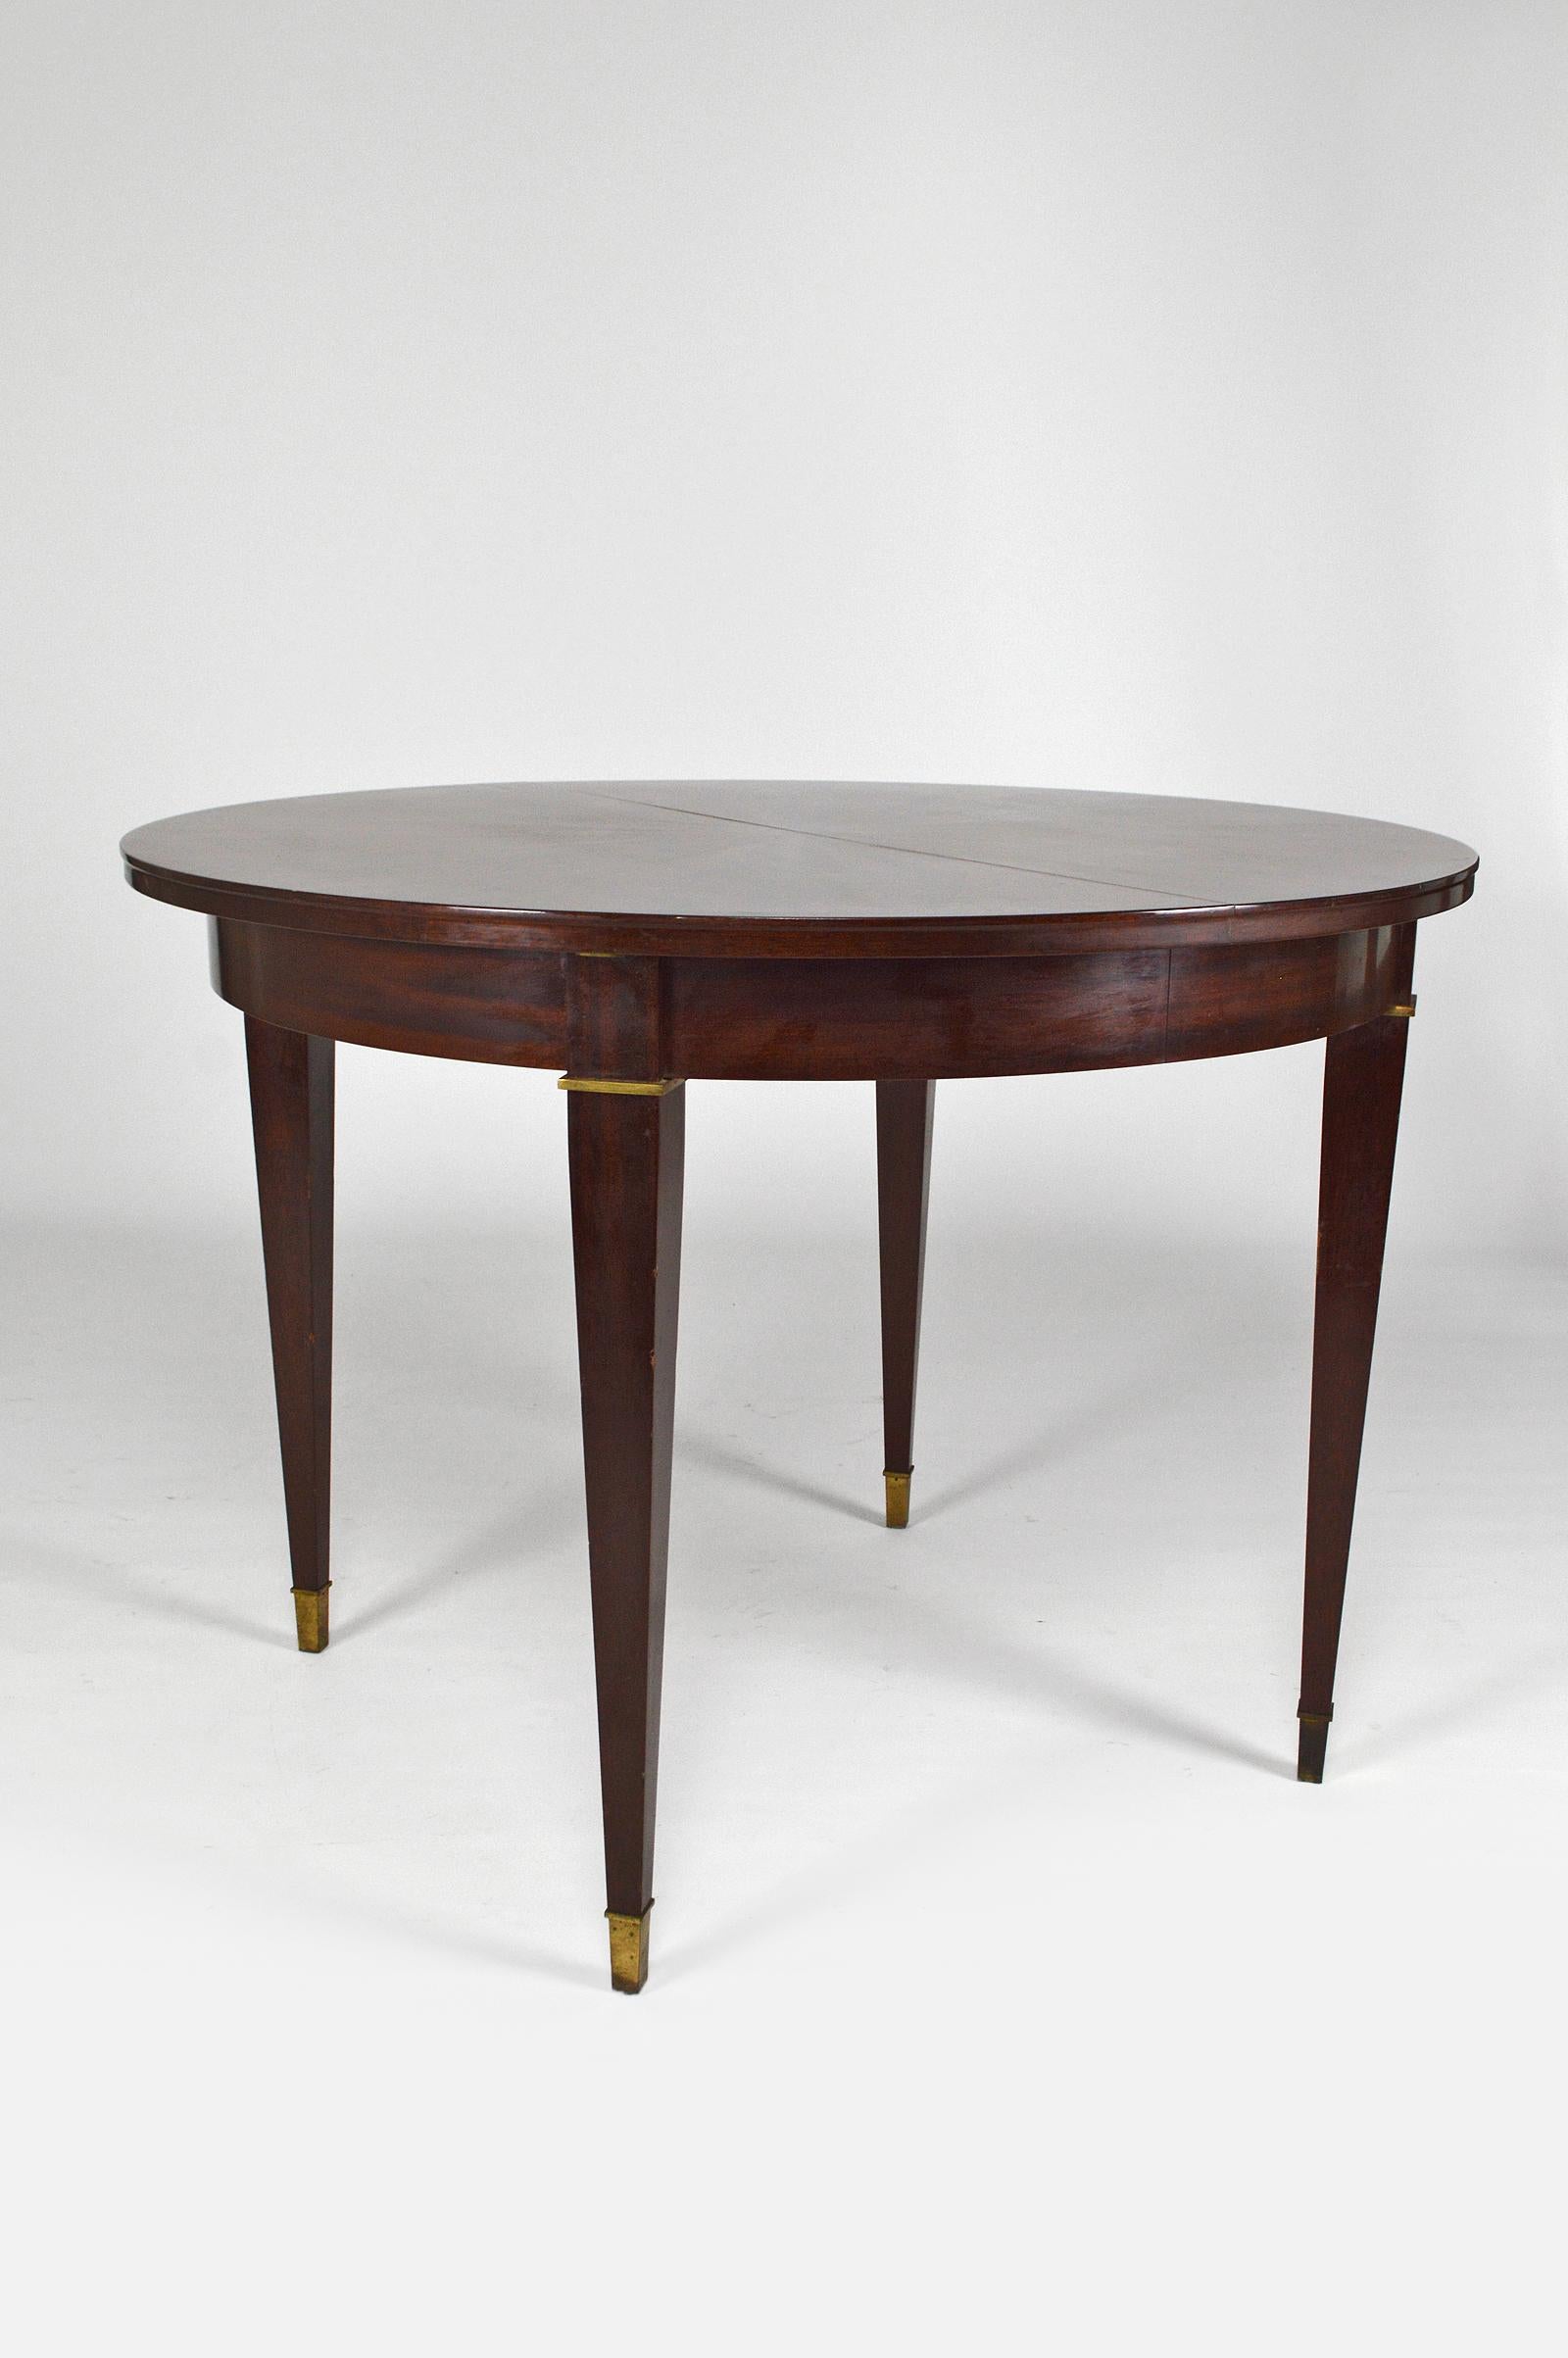 French Art Deco Mahogany Round Table with Extensions, by Jacques Adnet, circa 1940 For Sale